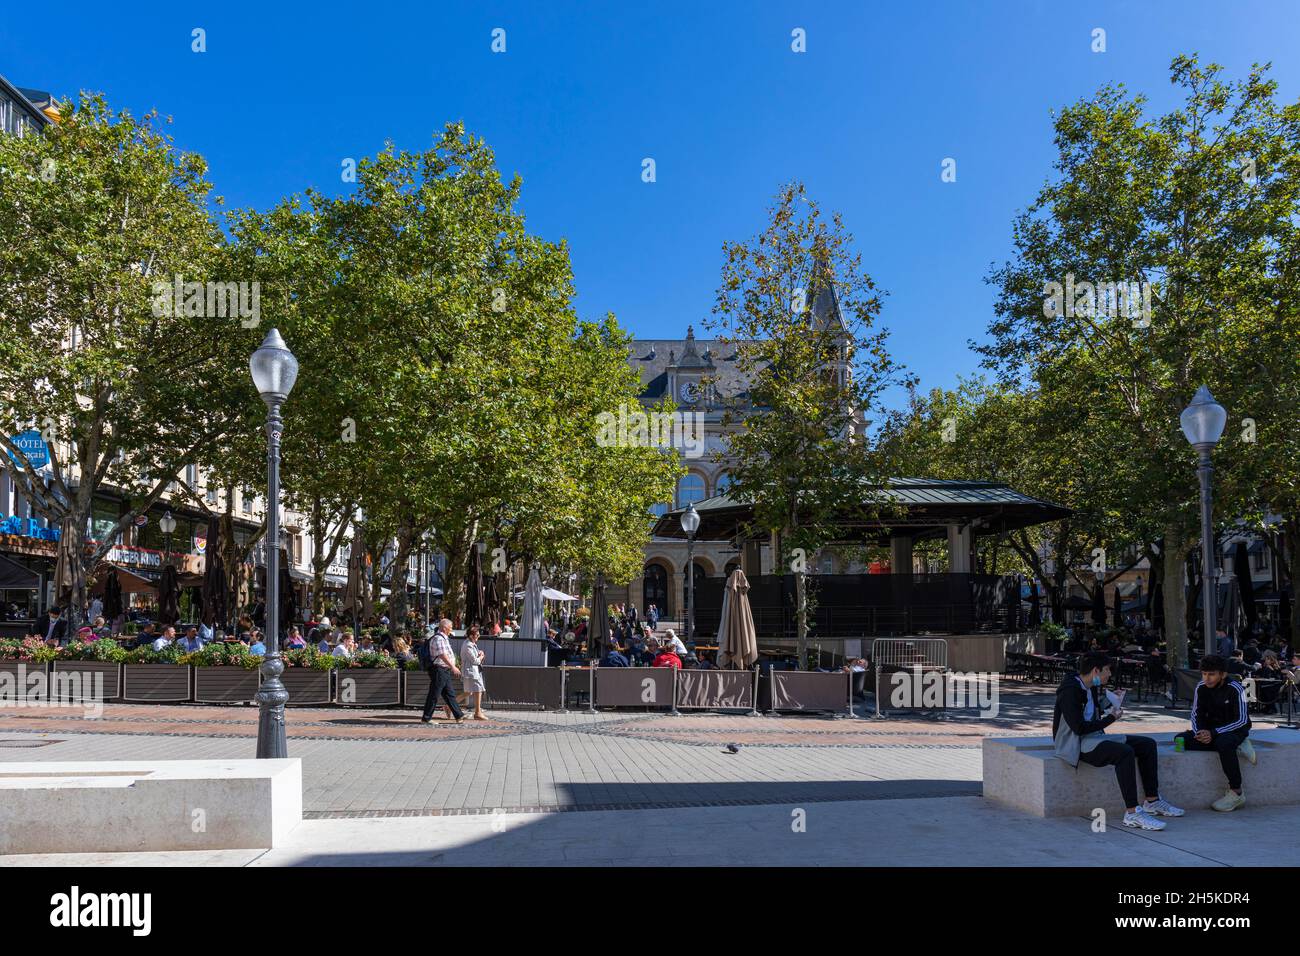 Europe, Luxembourg, Luxembourg City, Ville Haute, Place d'Armes with the Old City Kiosque (Bandstand) Stock Photo